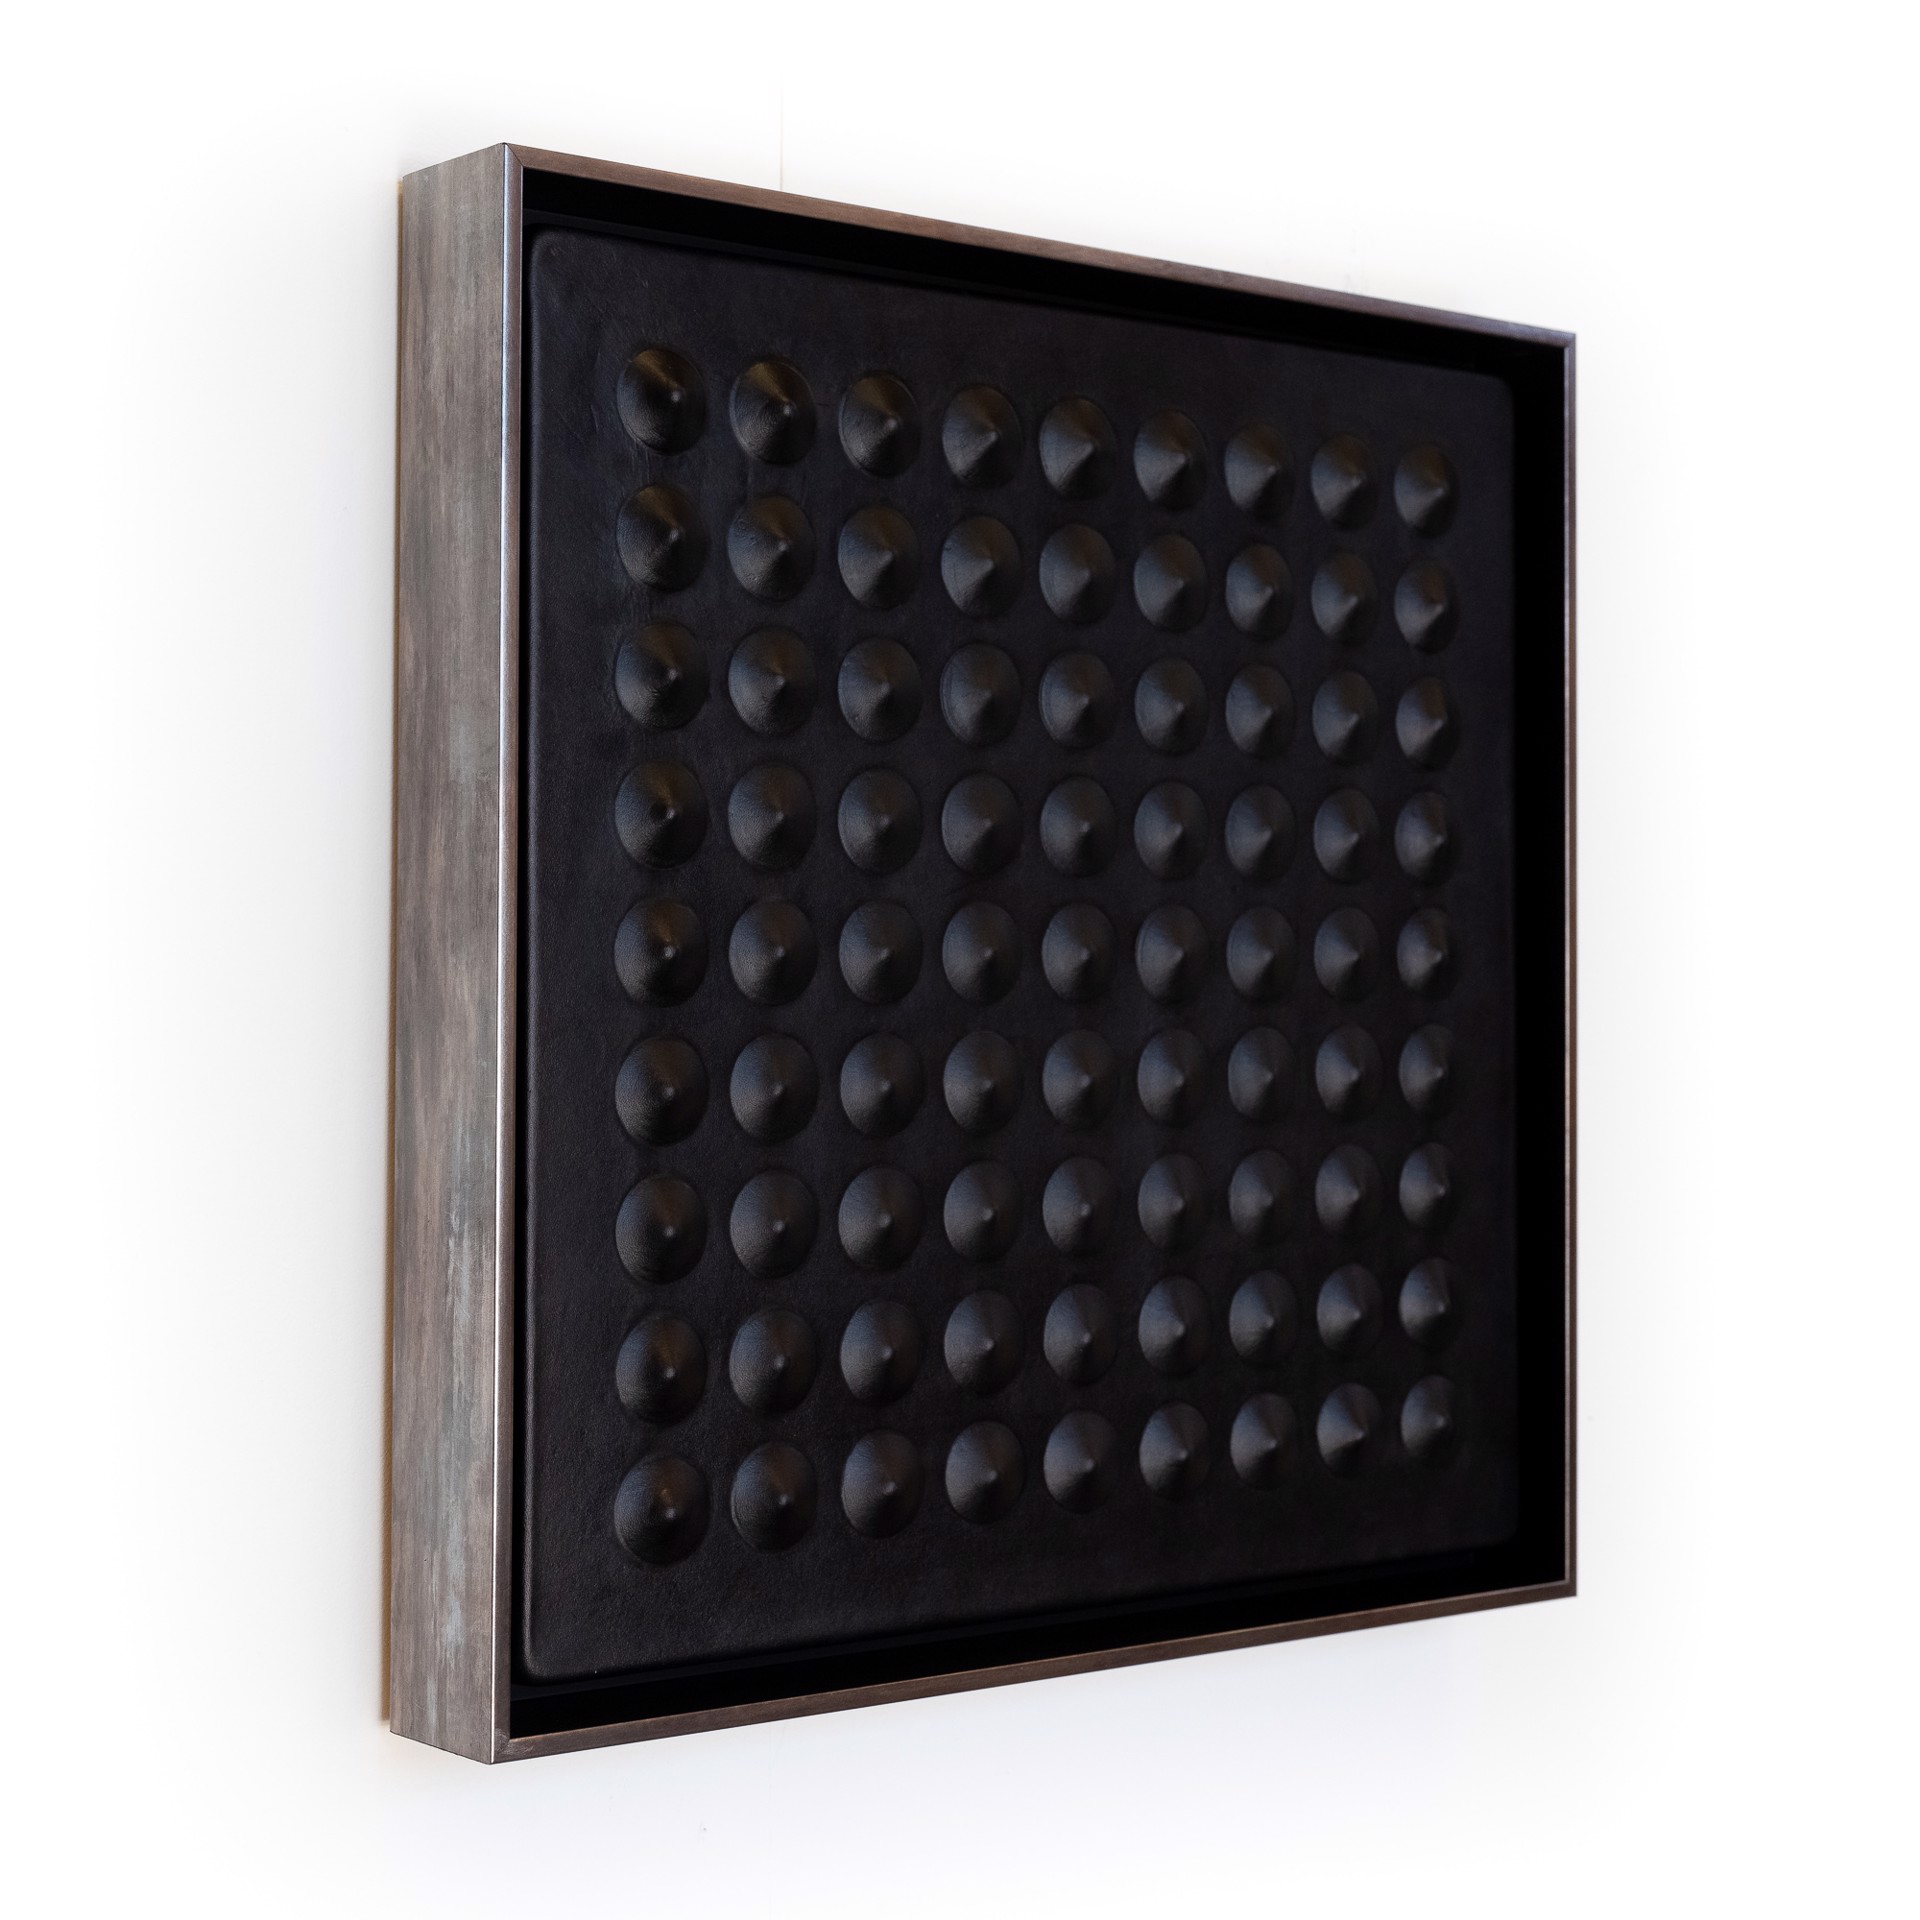 'Square' - Sexy Studs series by Mx. Hyde